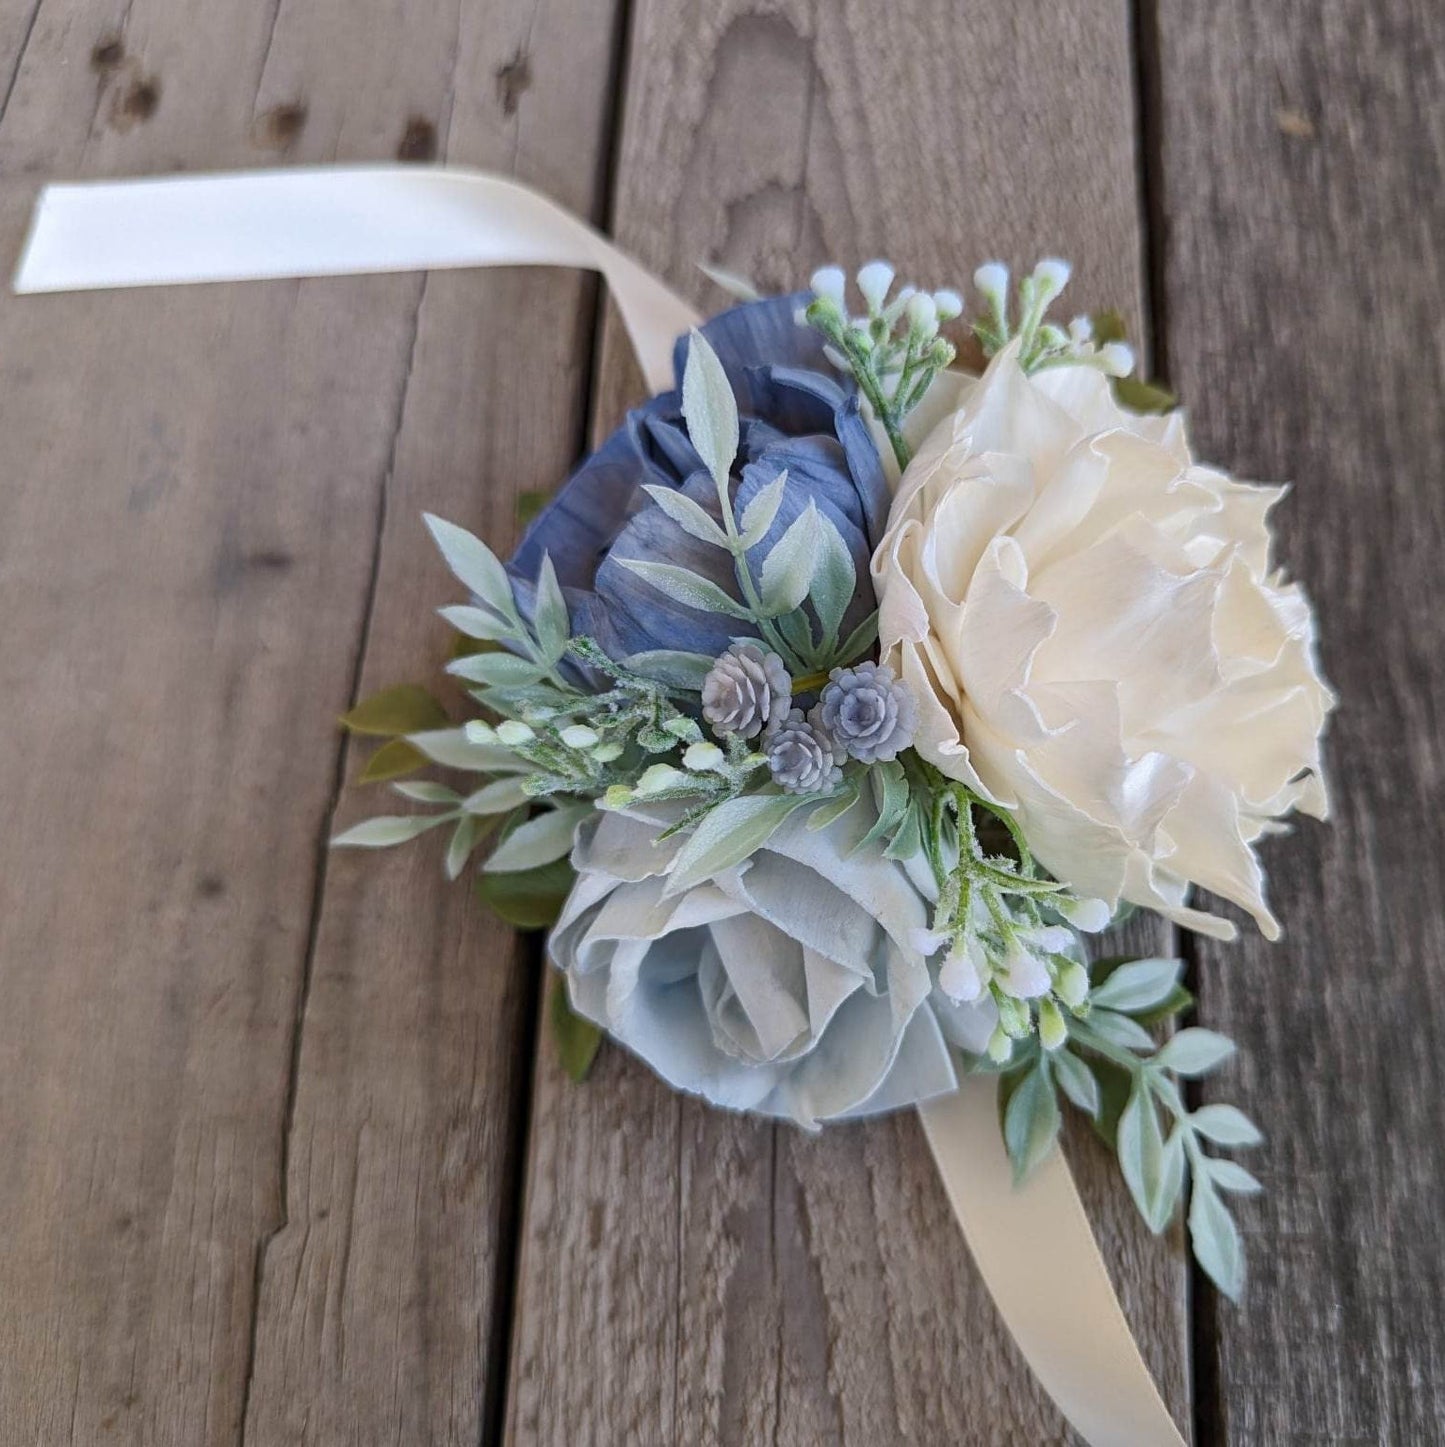 Corsage and Boutonniere Set, Wood Flower Wrist Corsage for Prom, Wooden Flower Corsage for Wedding